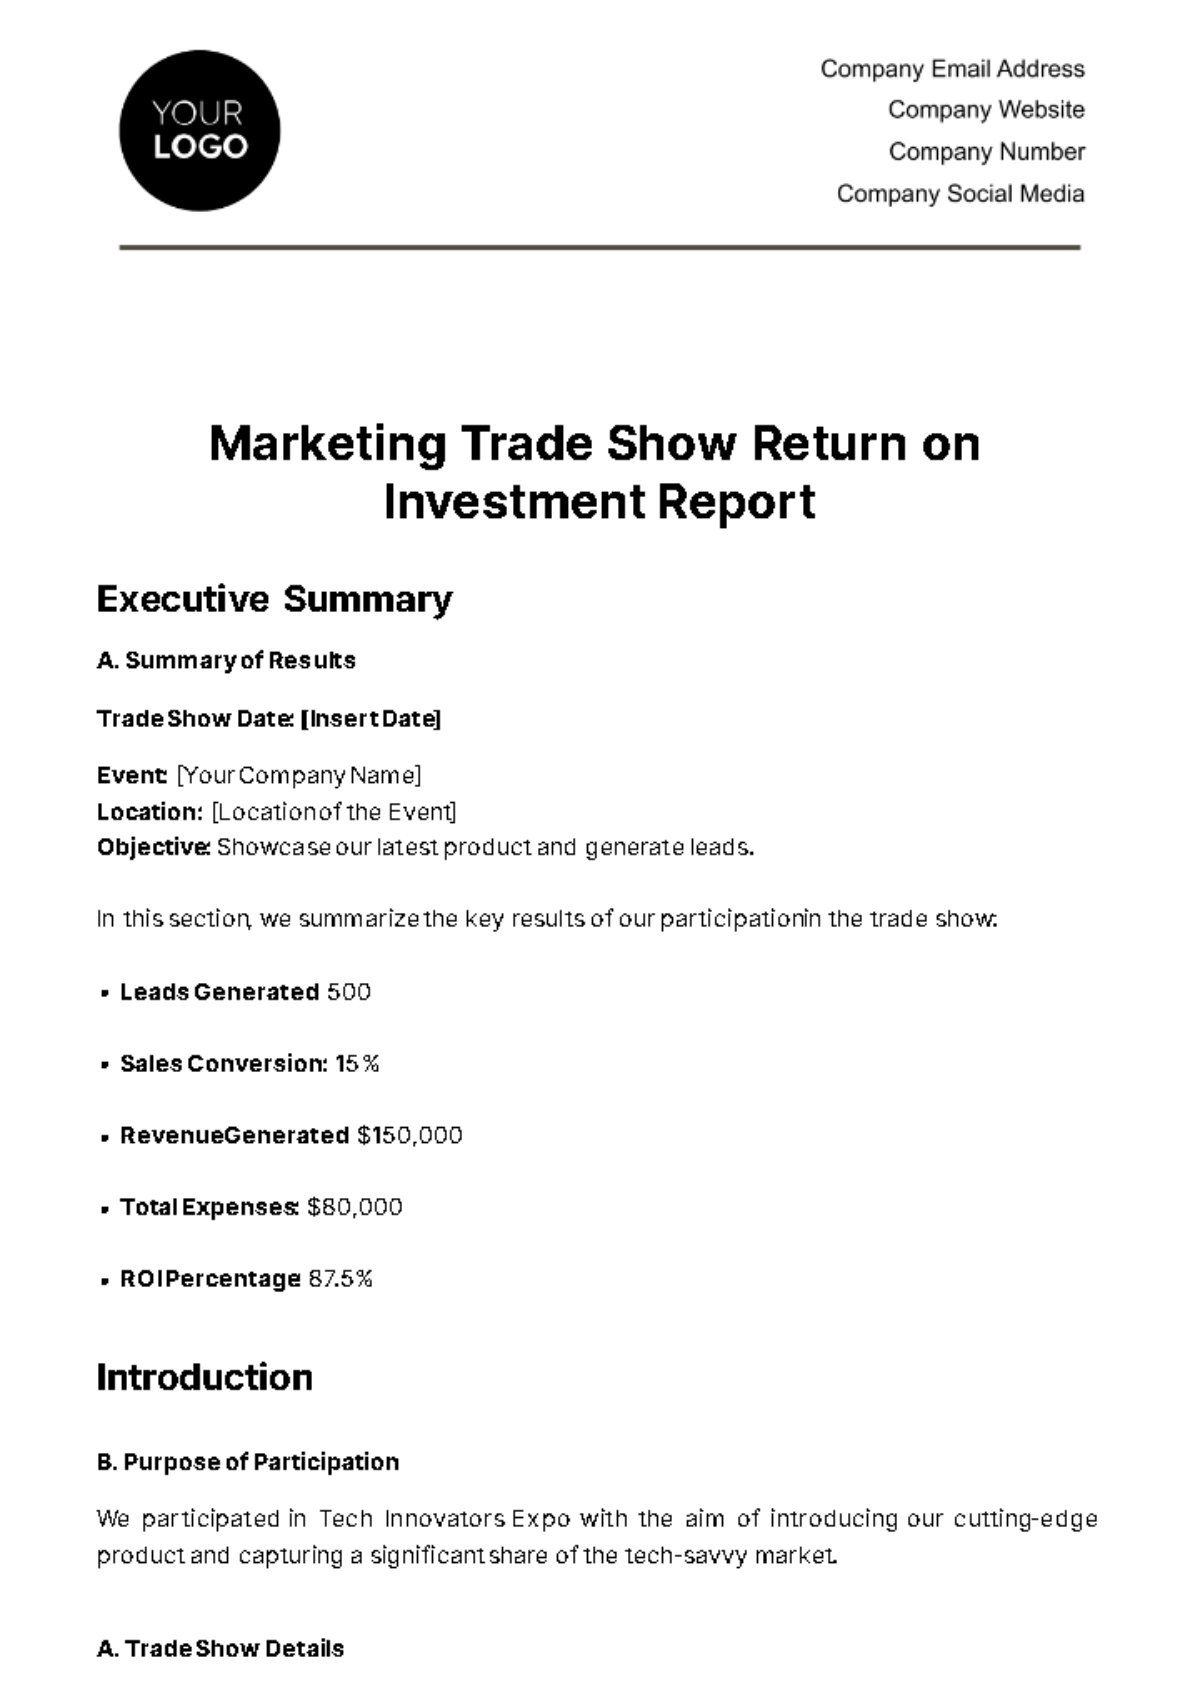 Free Marketing Trade Show Return on Investment Report Template